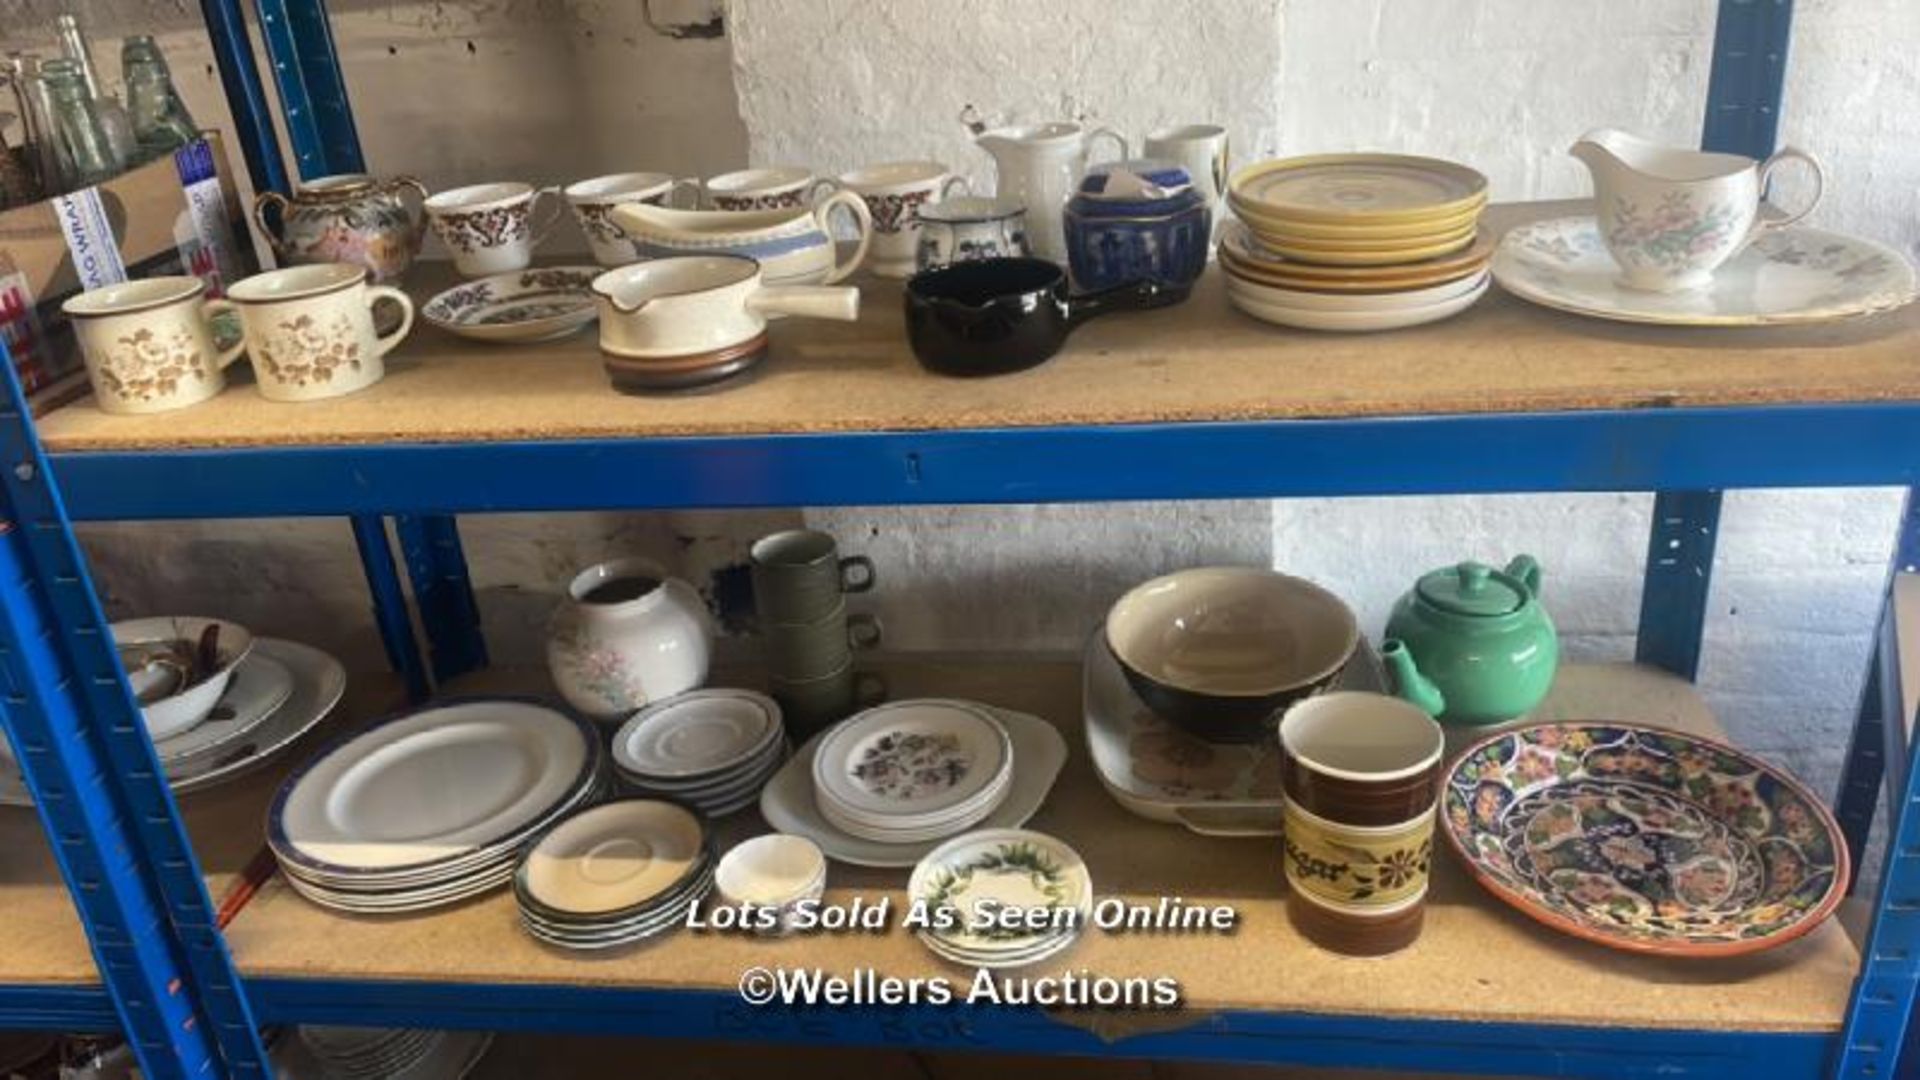 LARGE ASSORTMENT OF TABLEWARE INCLUDING DENBY STONEWARE, ROYAL DOULTON AND STUDIO POTTERY PLATE